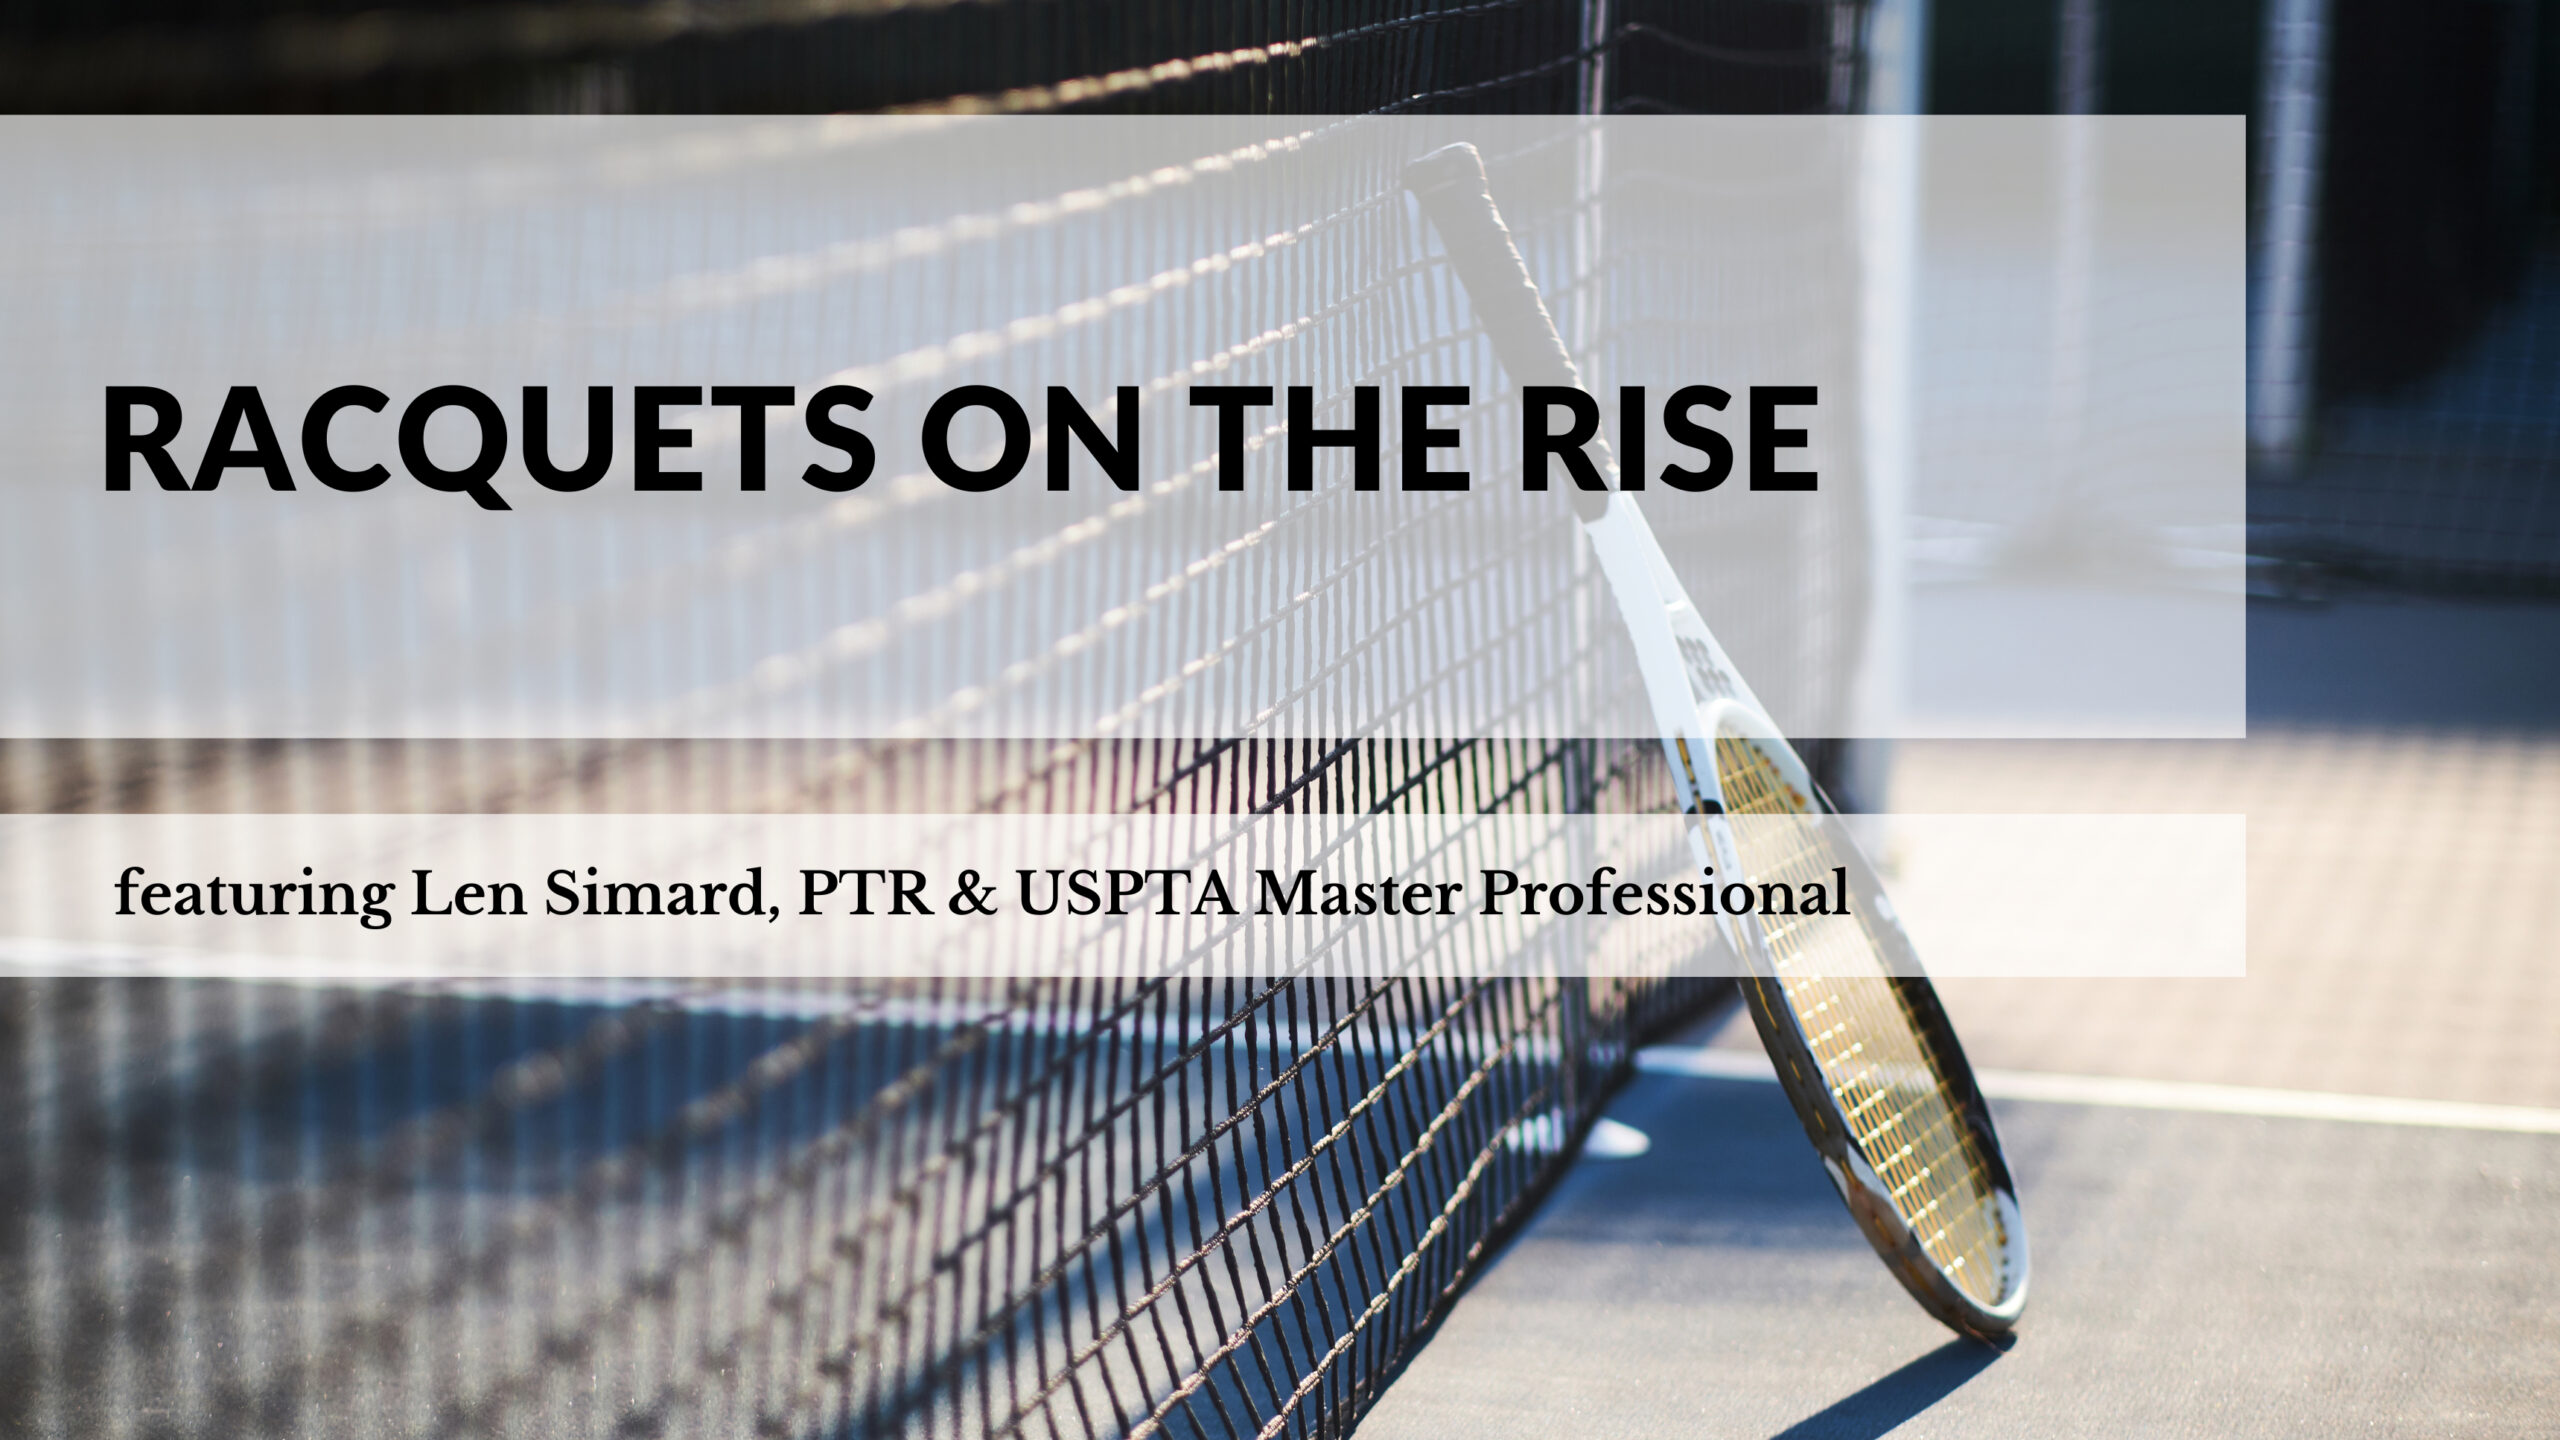 Racquets on the Rise